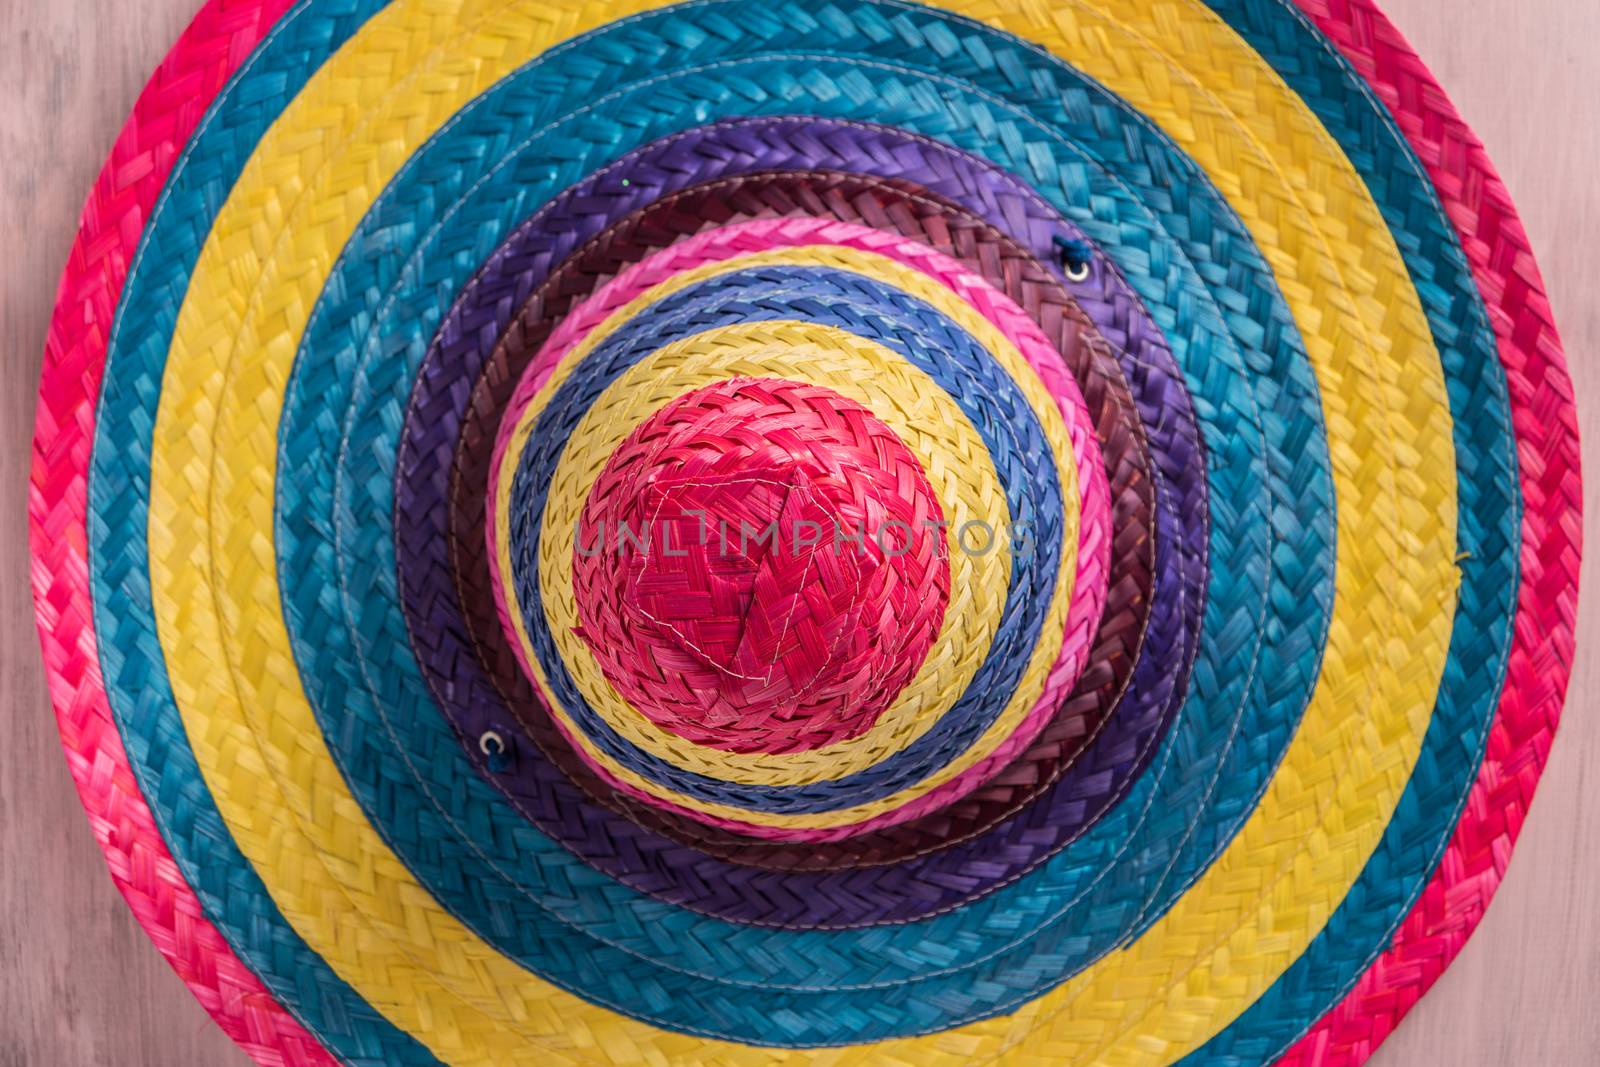 Mexican background. Sombrero on rustic wooden background. Top view with copy space